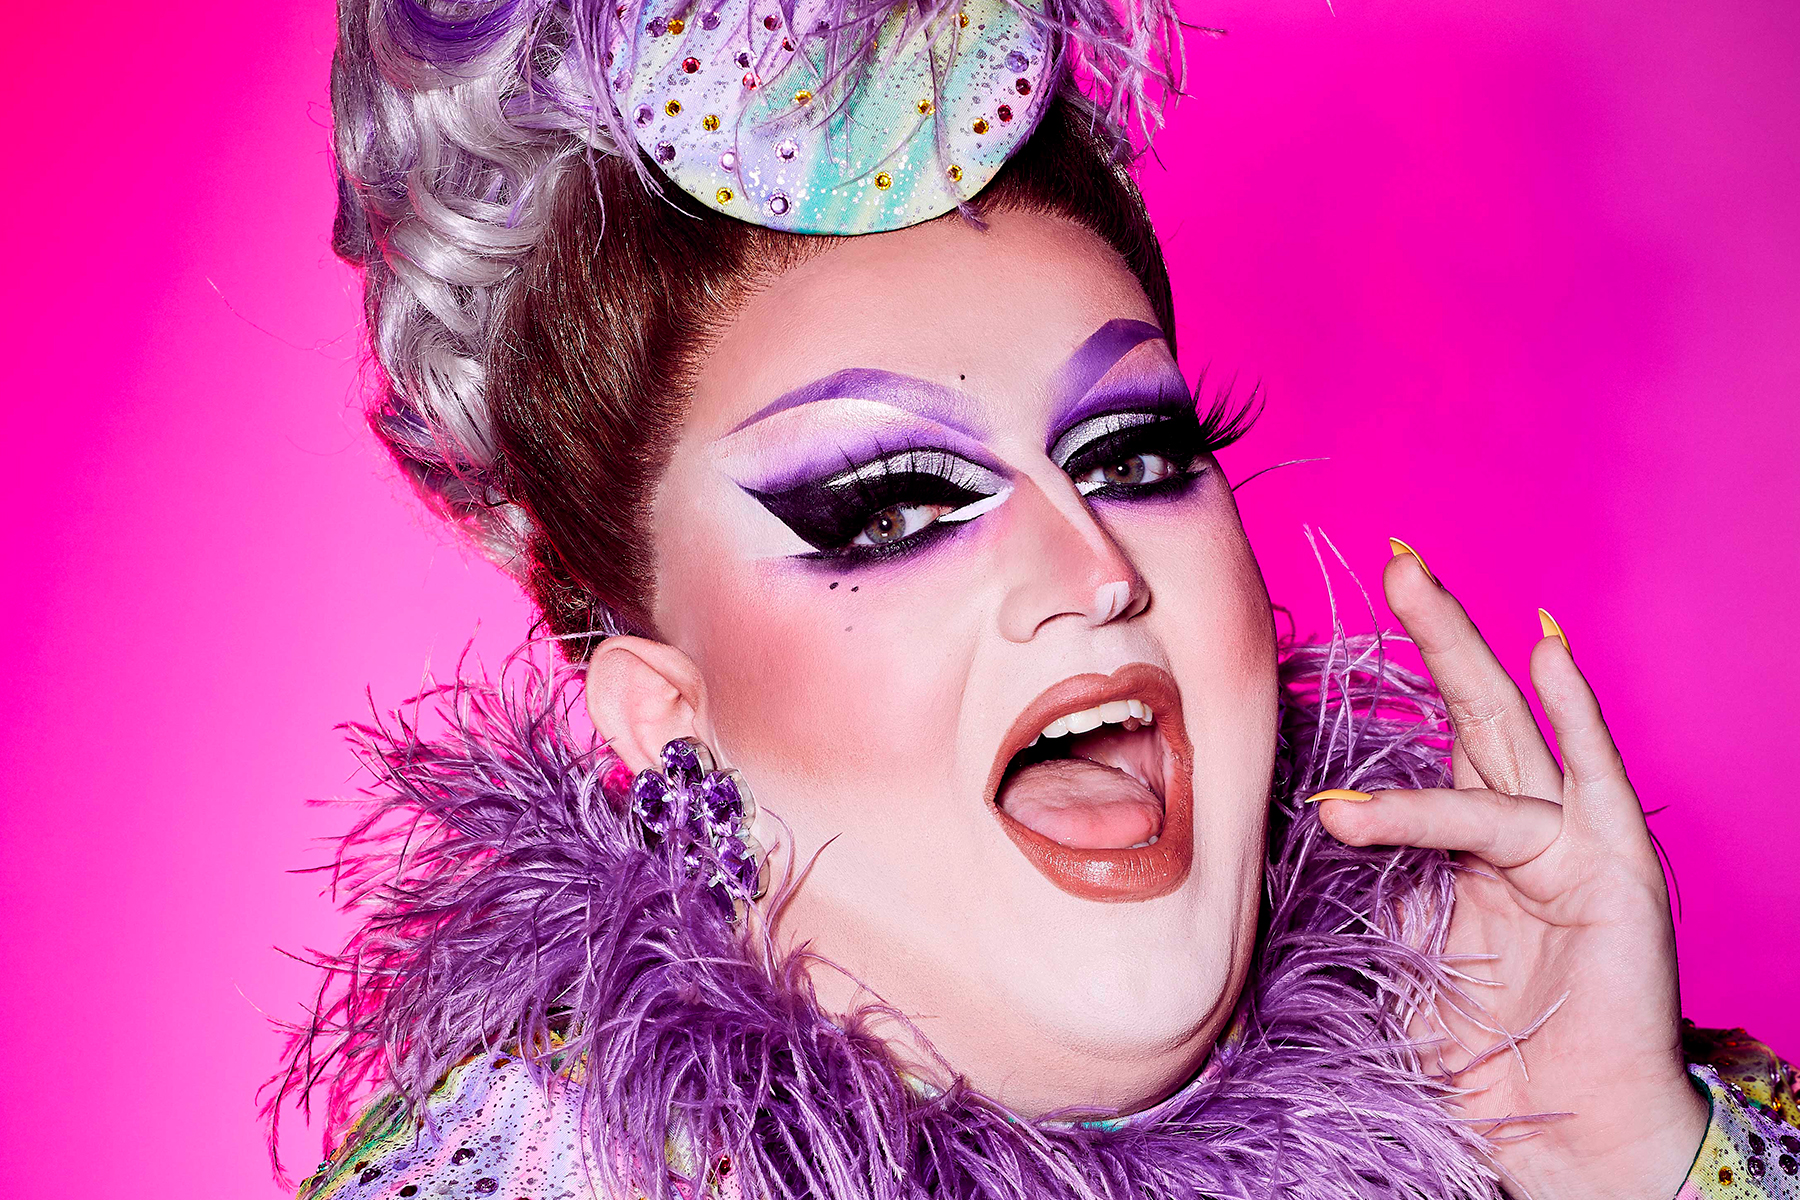 A photo of Drag Race superstar Lawrence Chaney, in hues of purple against a pink background.